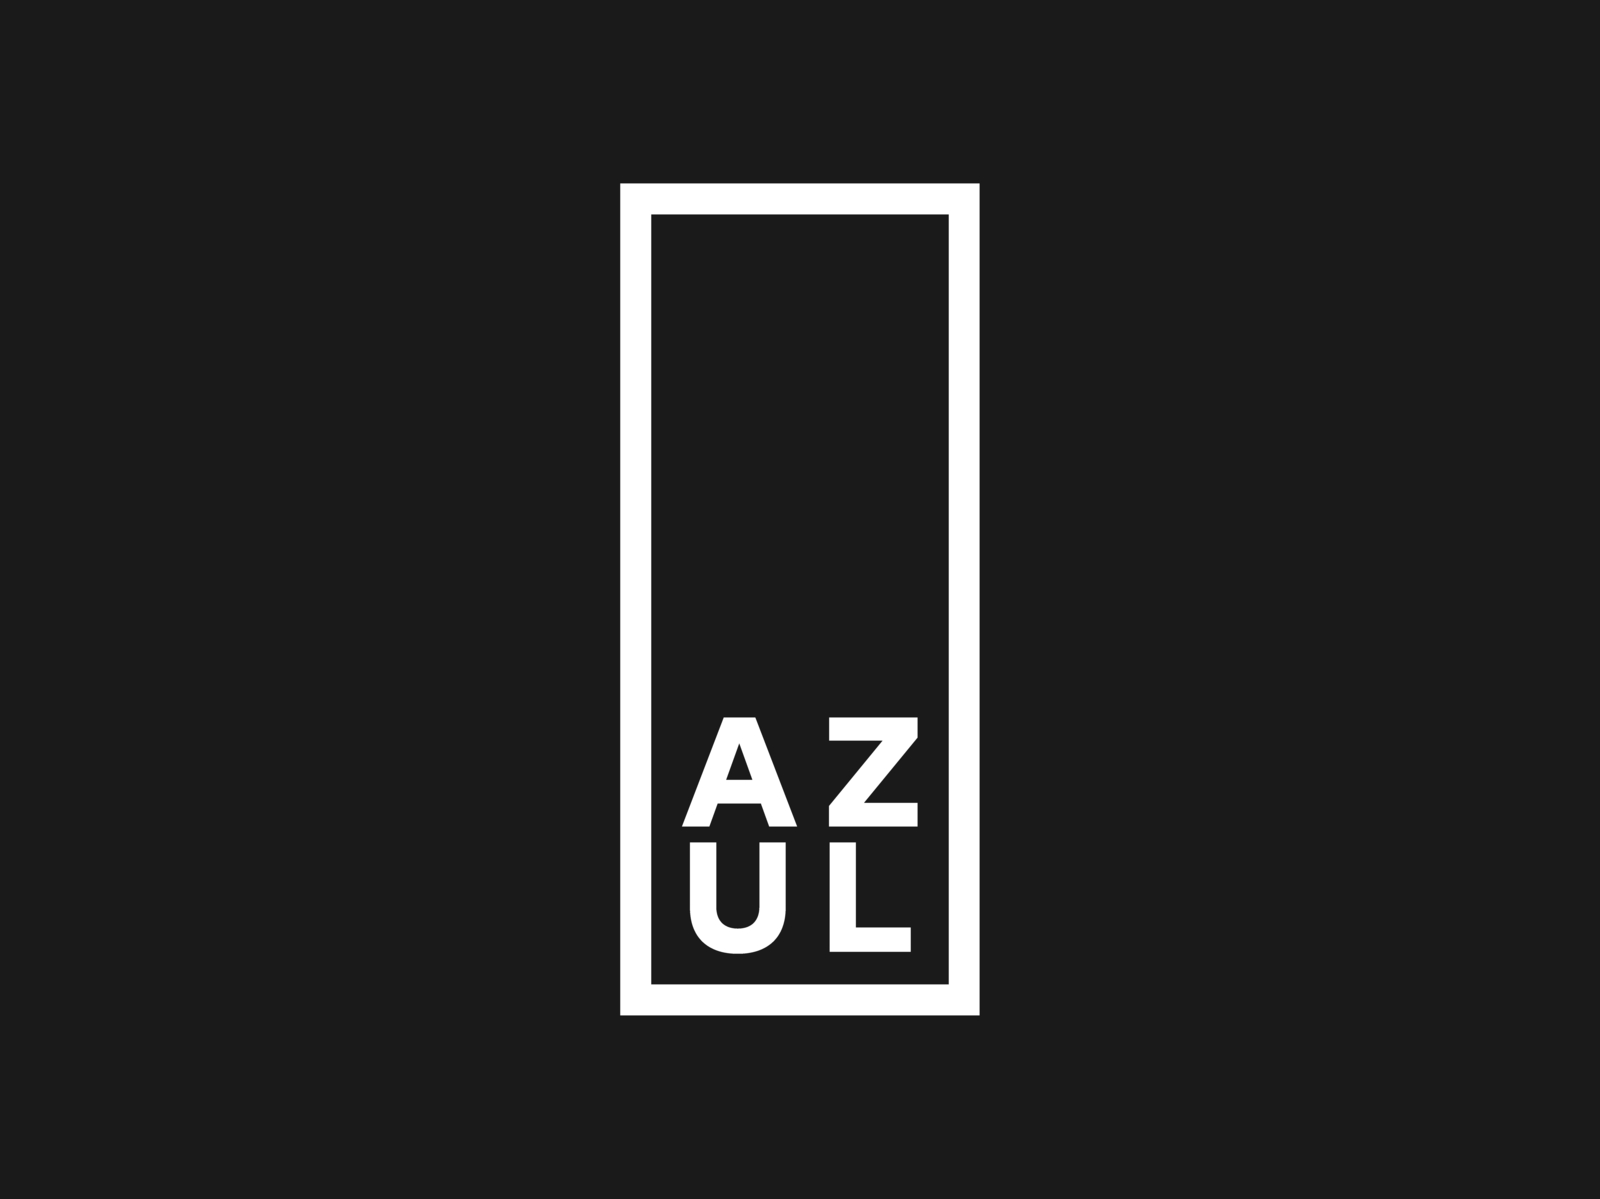 LOGO 2019 negative by Azul • Head of Product 🇵🇪 on Dribbble